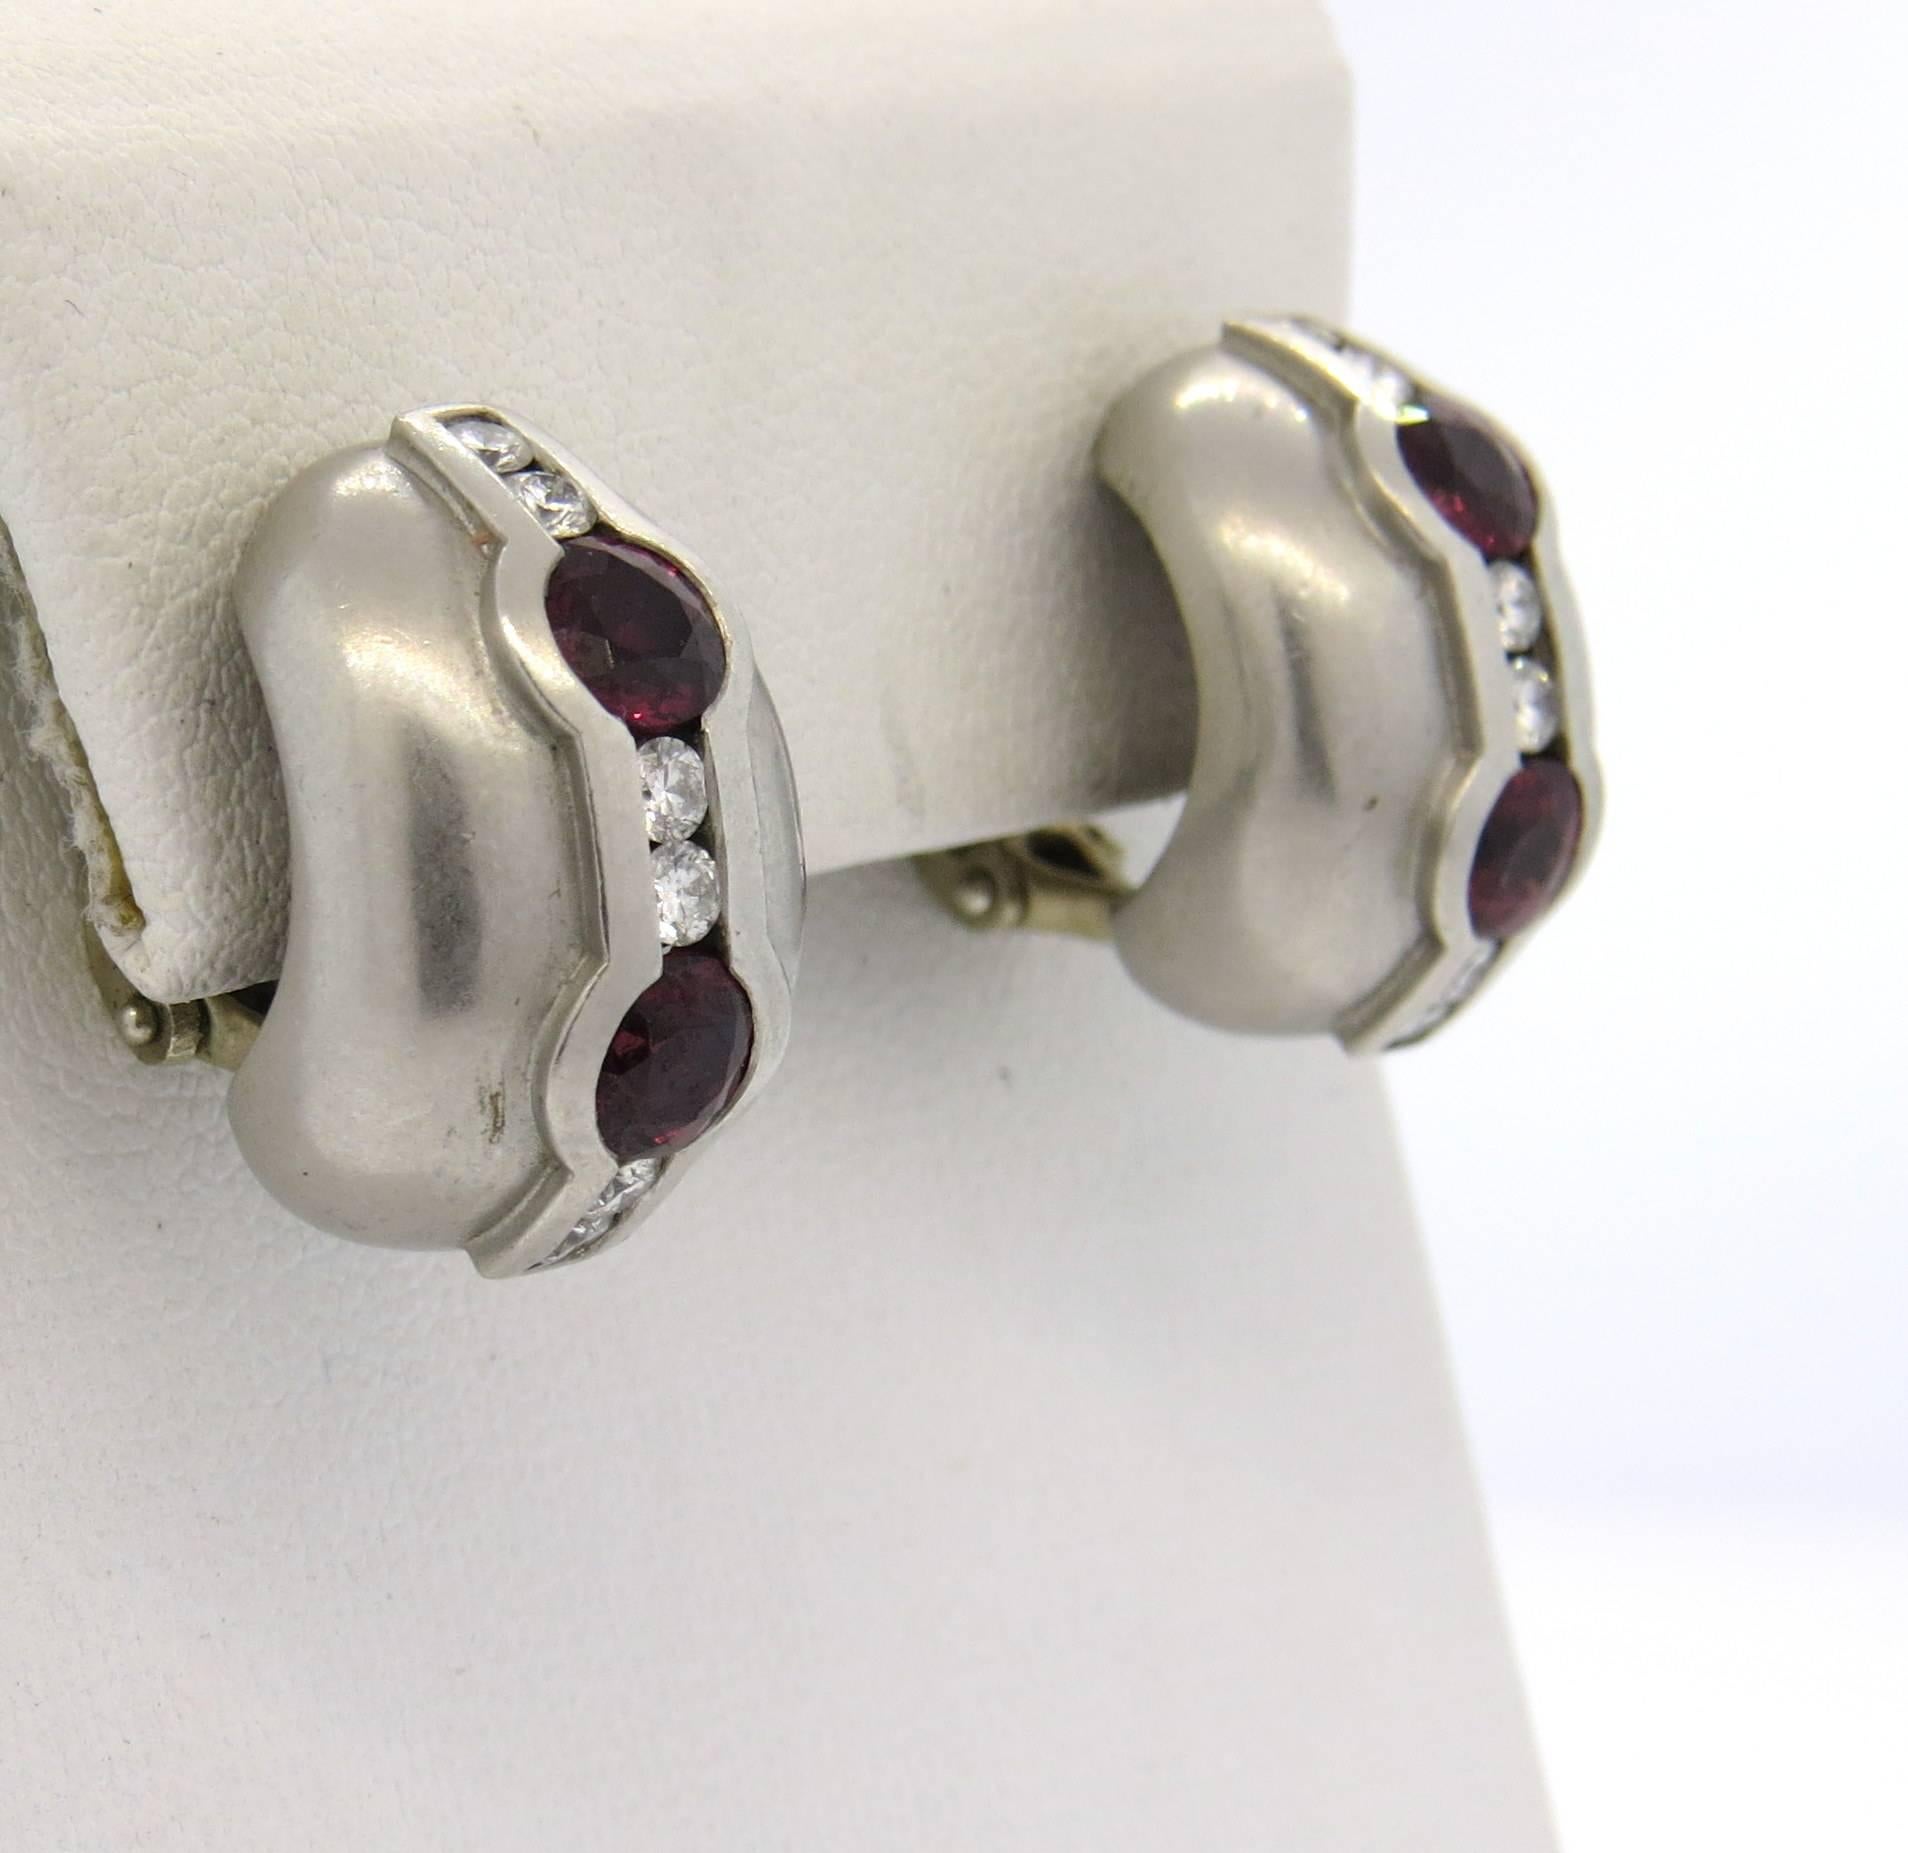 A pair of platinum earrings, crafted by Kieselstein Cord, featuring two ruby gemstones each, surrounded with a total of approx. 0.48ctw in G/VS diamonds. Earrings are 20mm x 13mm. Marked:plat, Kieselstein Cord, makers mark,1997. Weight - 25.9 grams 